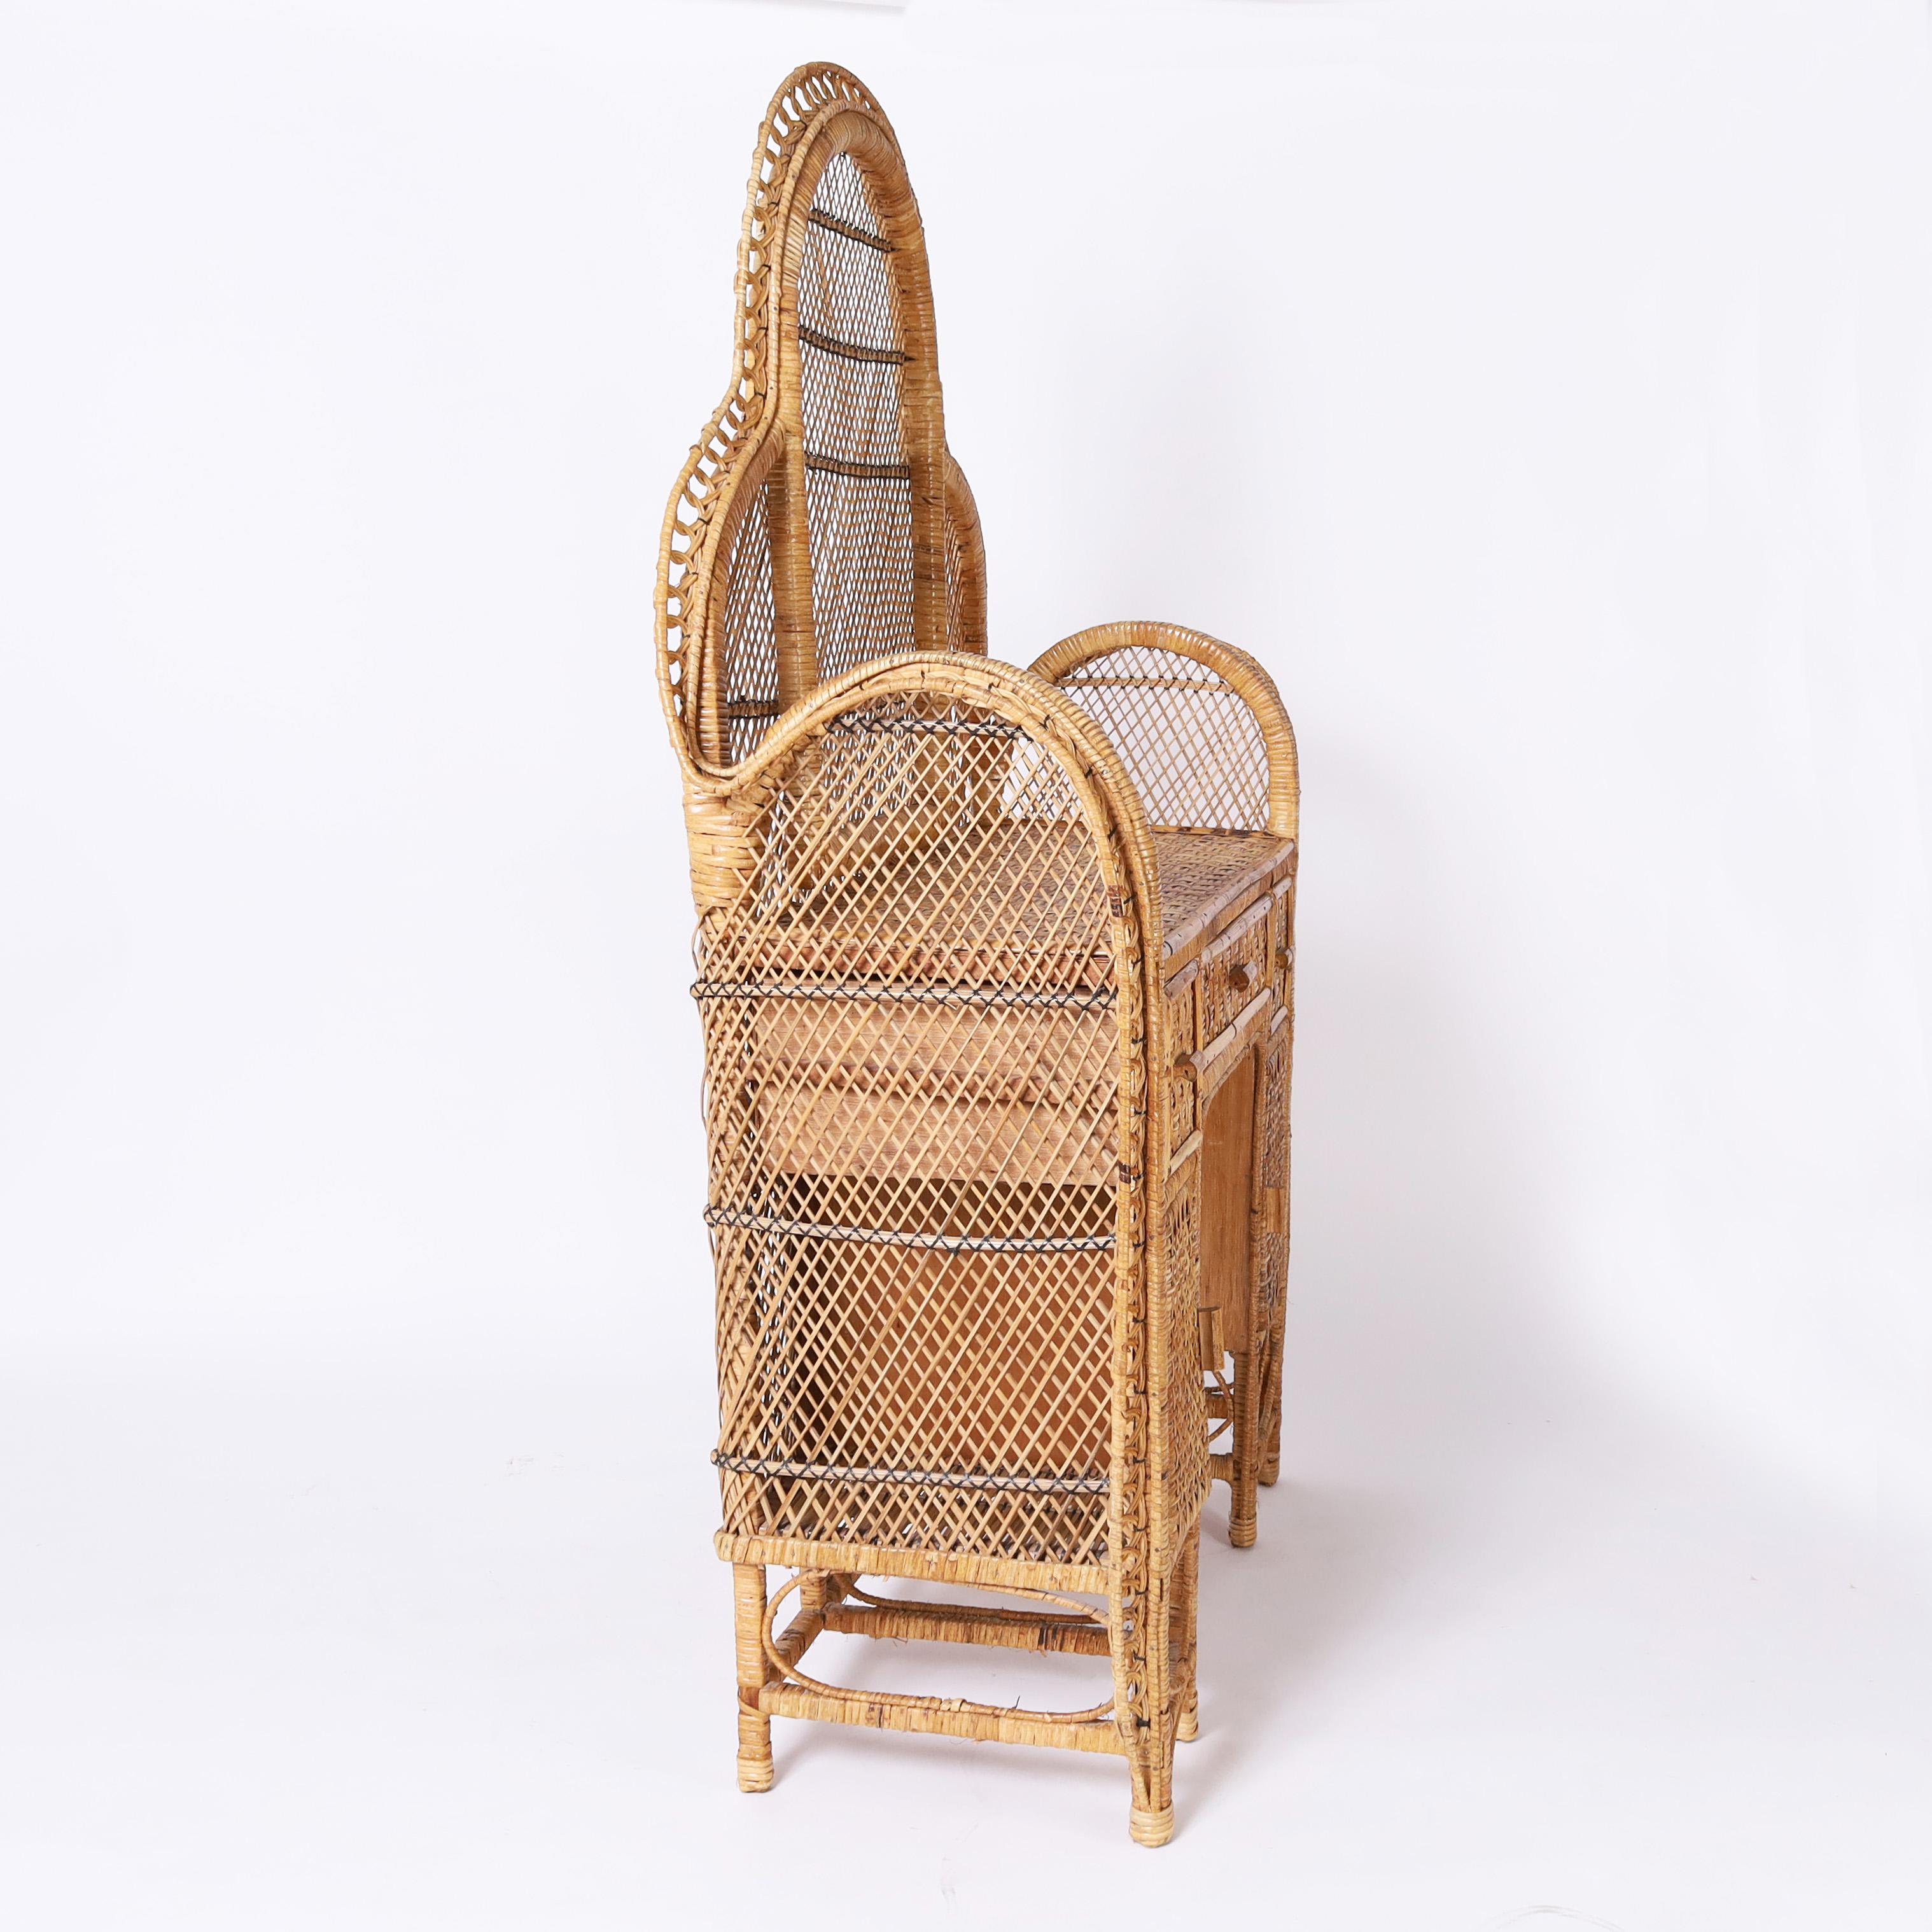 Anglo-Indian Vintage Anglo Indian Wicker and Rattan Peacock Vanity For Sale